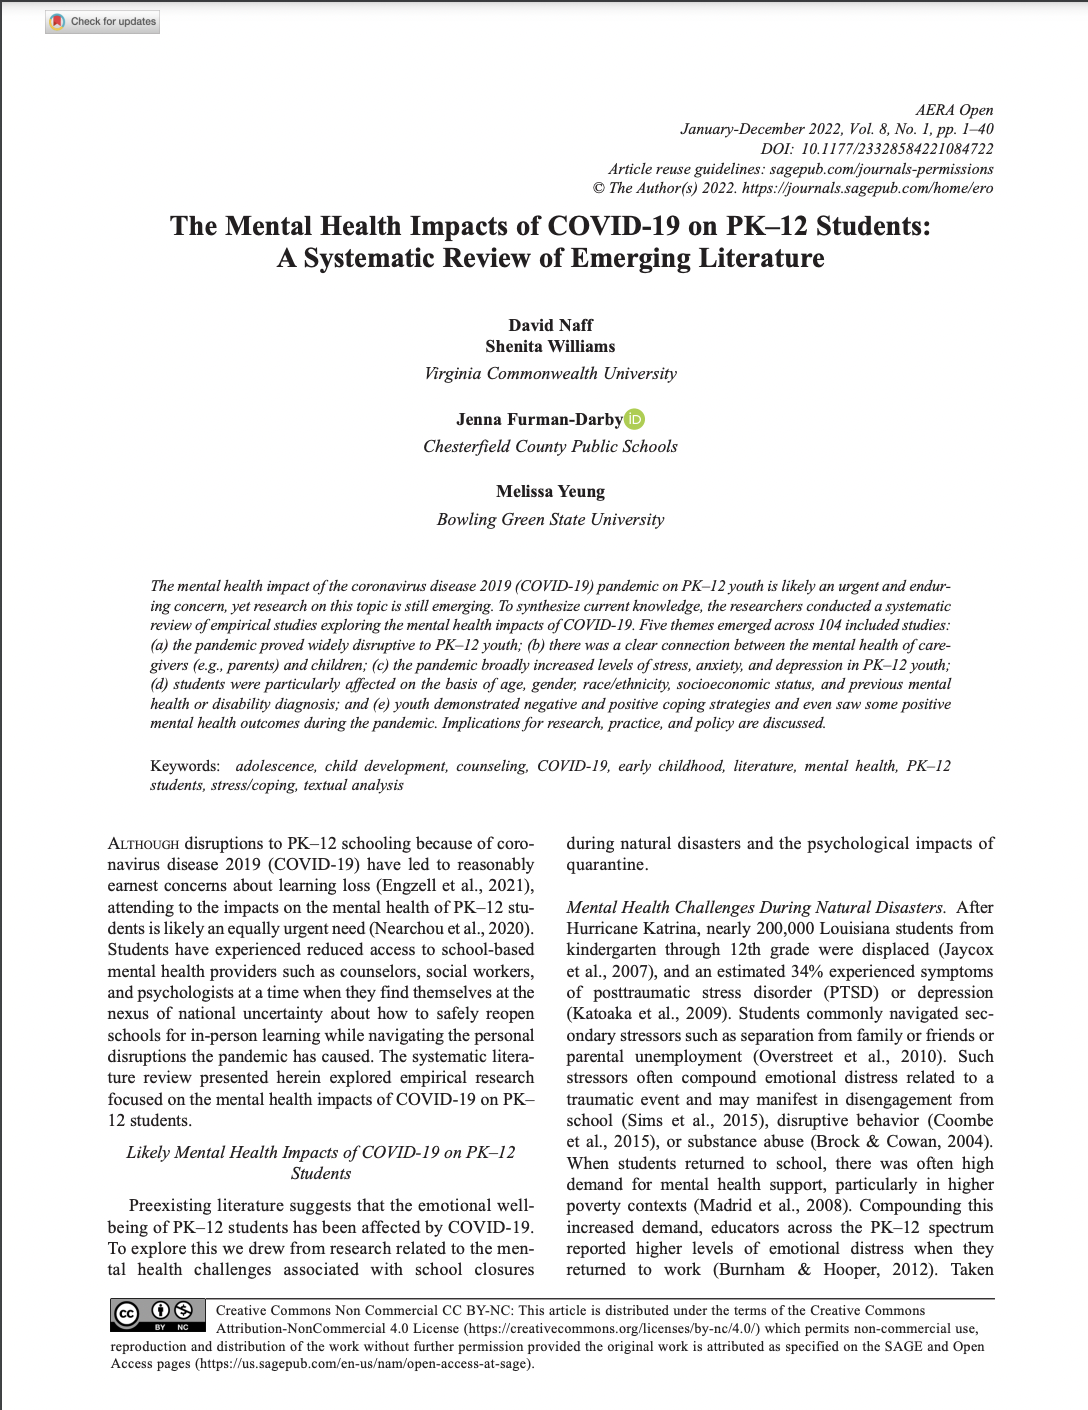 A screenshot of a MERC article in AERA Open about the mental health impacts of COVID-19